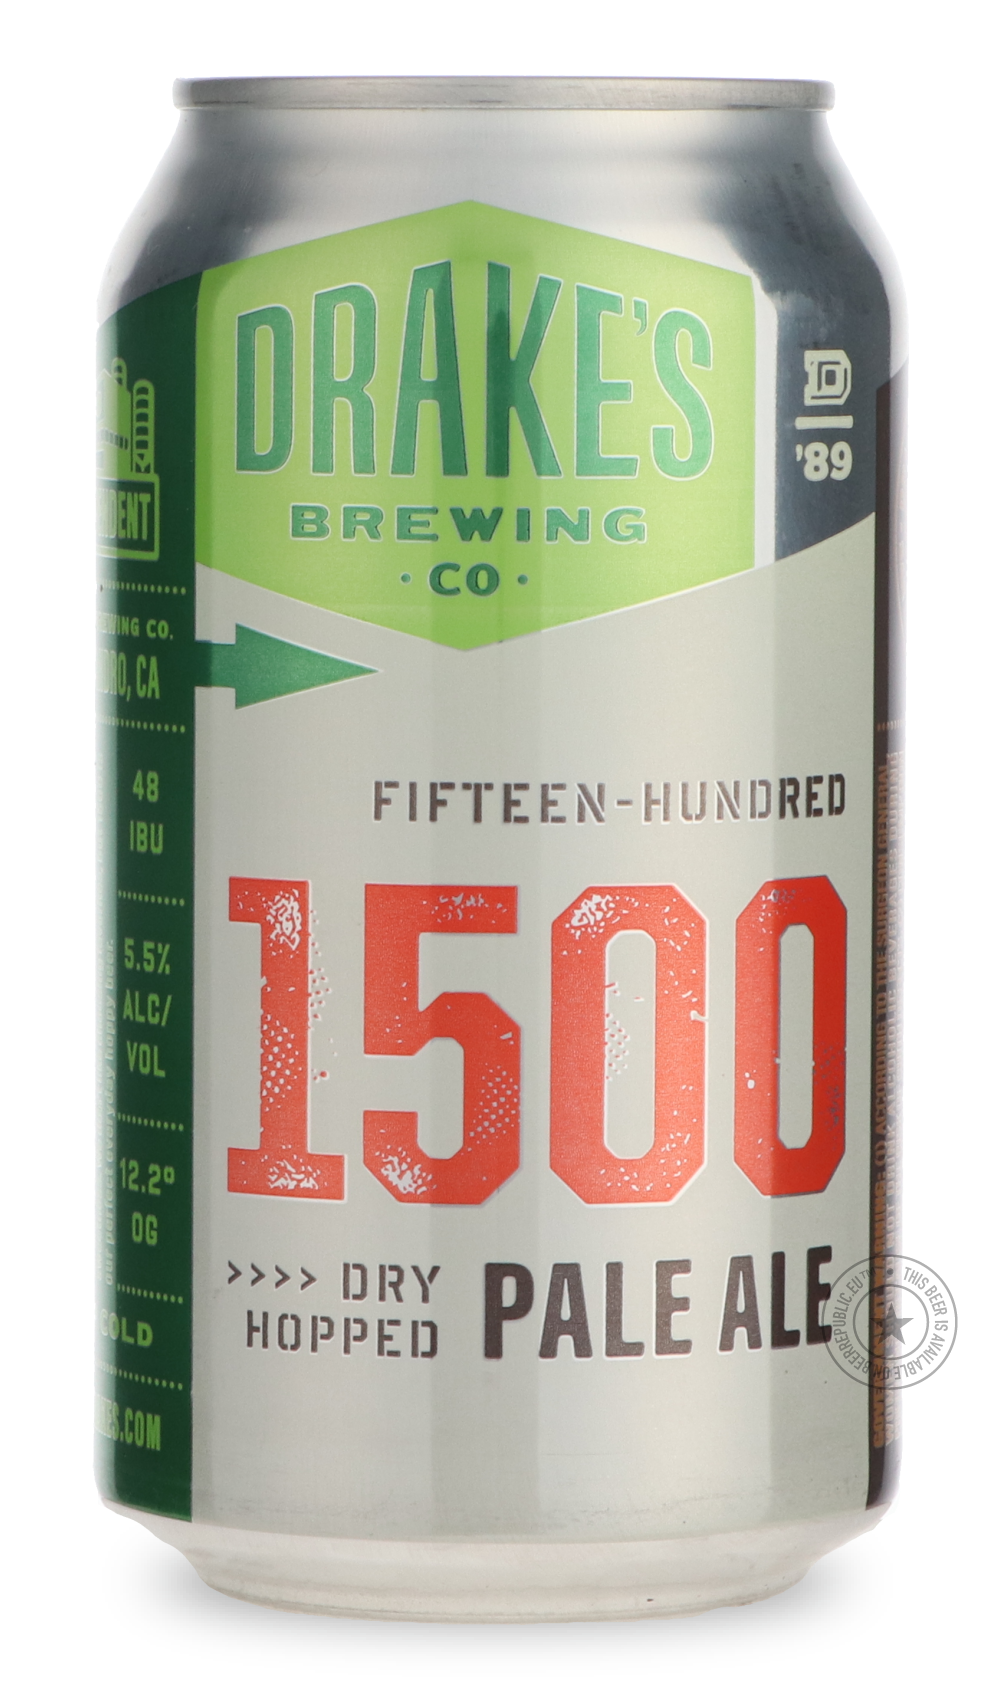 -Drake's- 1500-Pale- Only @ Beer Republic - The best online beer store for American & Canadian craft beer - Buy beer online from the USA and Canada - Bier online kopen - Amerikaans bier kopen - Craft beer store - Craft beer kopen - Amerikanisch bier kaufen - Bier online kaufen - Acheter biere online - IPA - Stout - Porter - New England IPA - Hazy IPA - Imperial Stout - Barrel Aged - Barrel Aged Imperial Stout - Brown - Dark beer - Blond - Blonde - Pilsner - Lager - Wheat - Weizen - Amber - Barley Wine - Qua